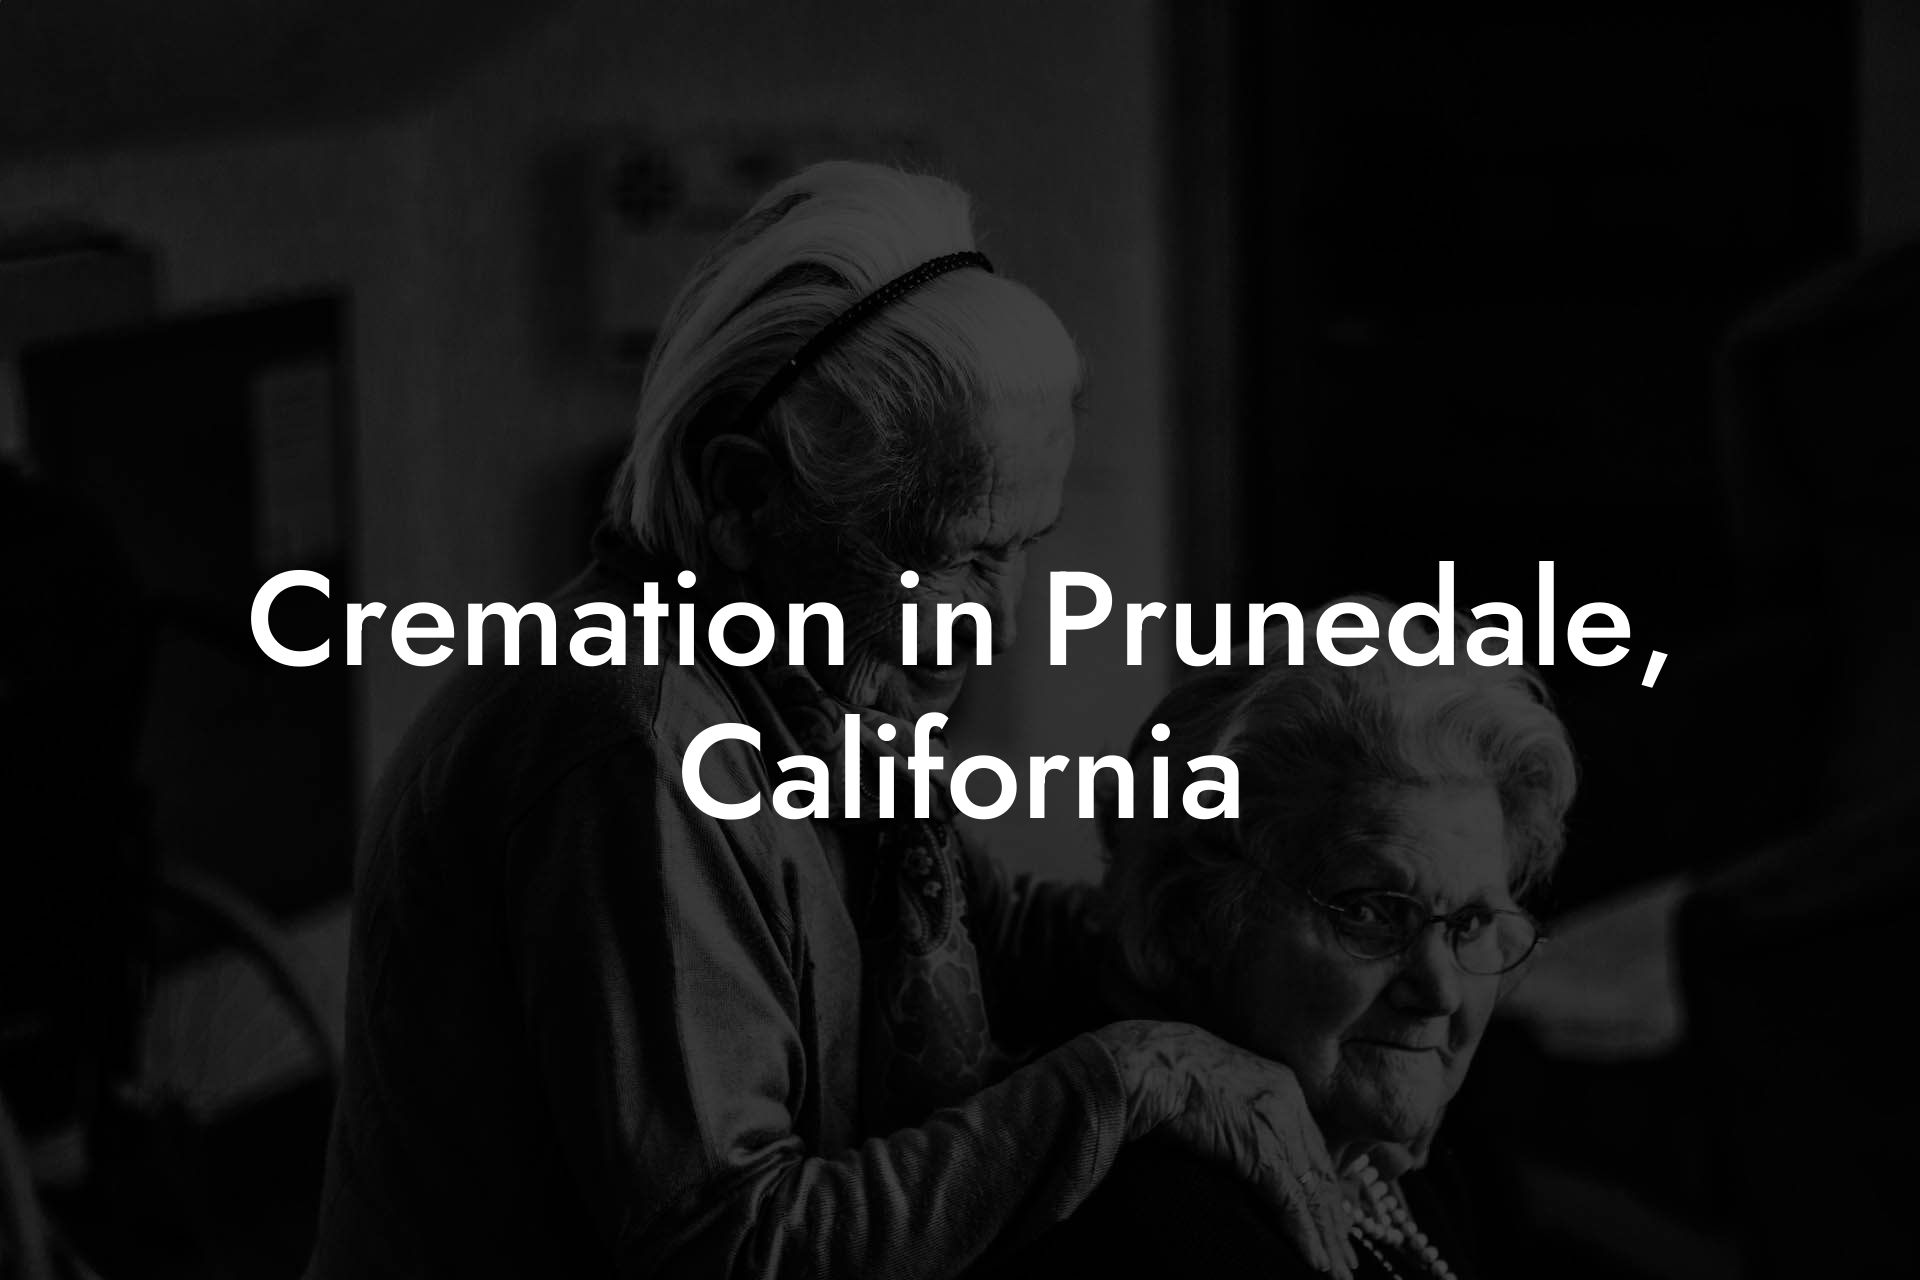 Cremation in Prunedale, California